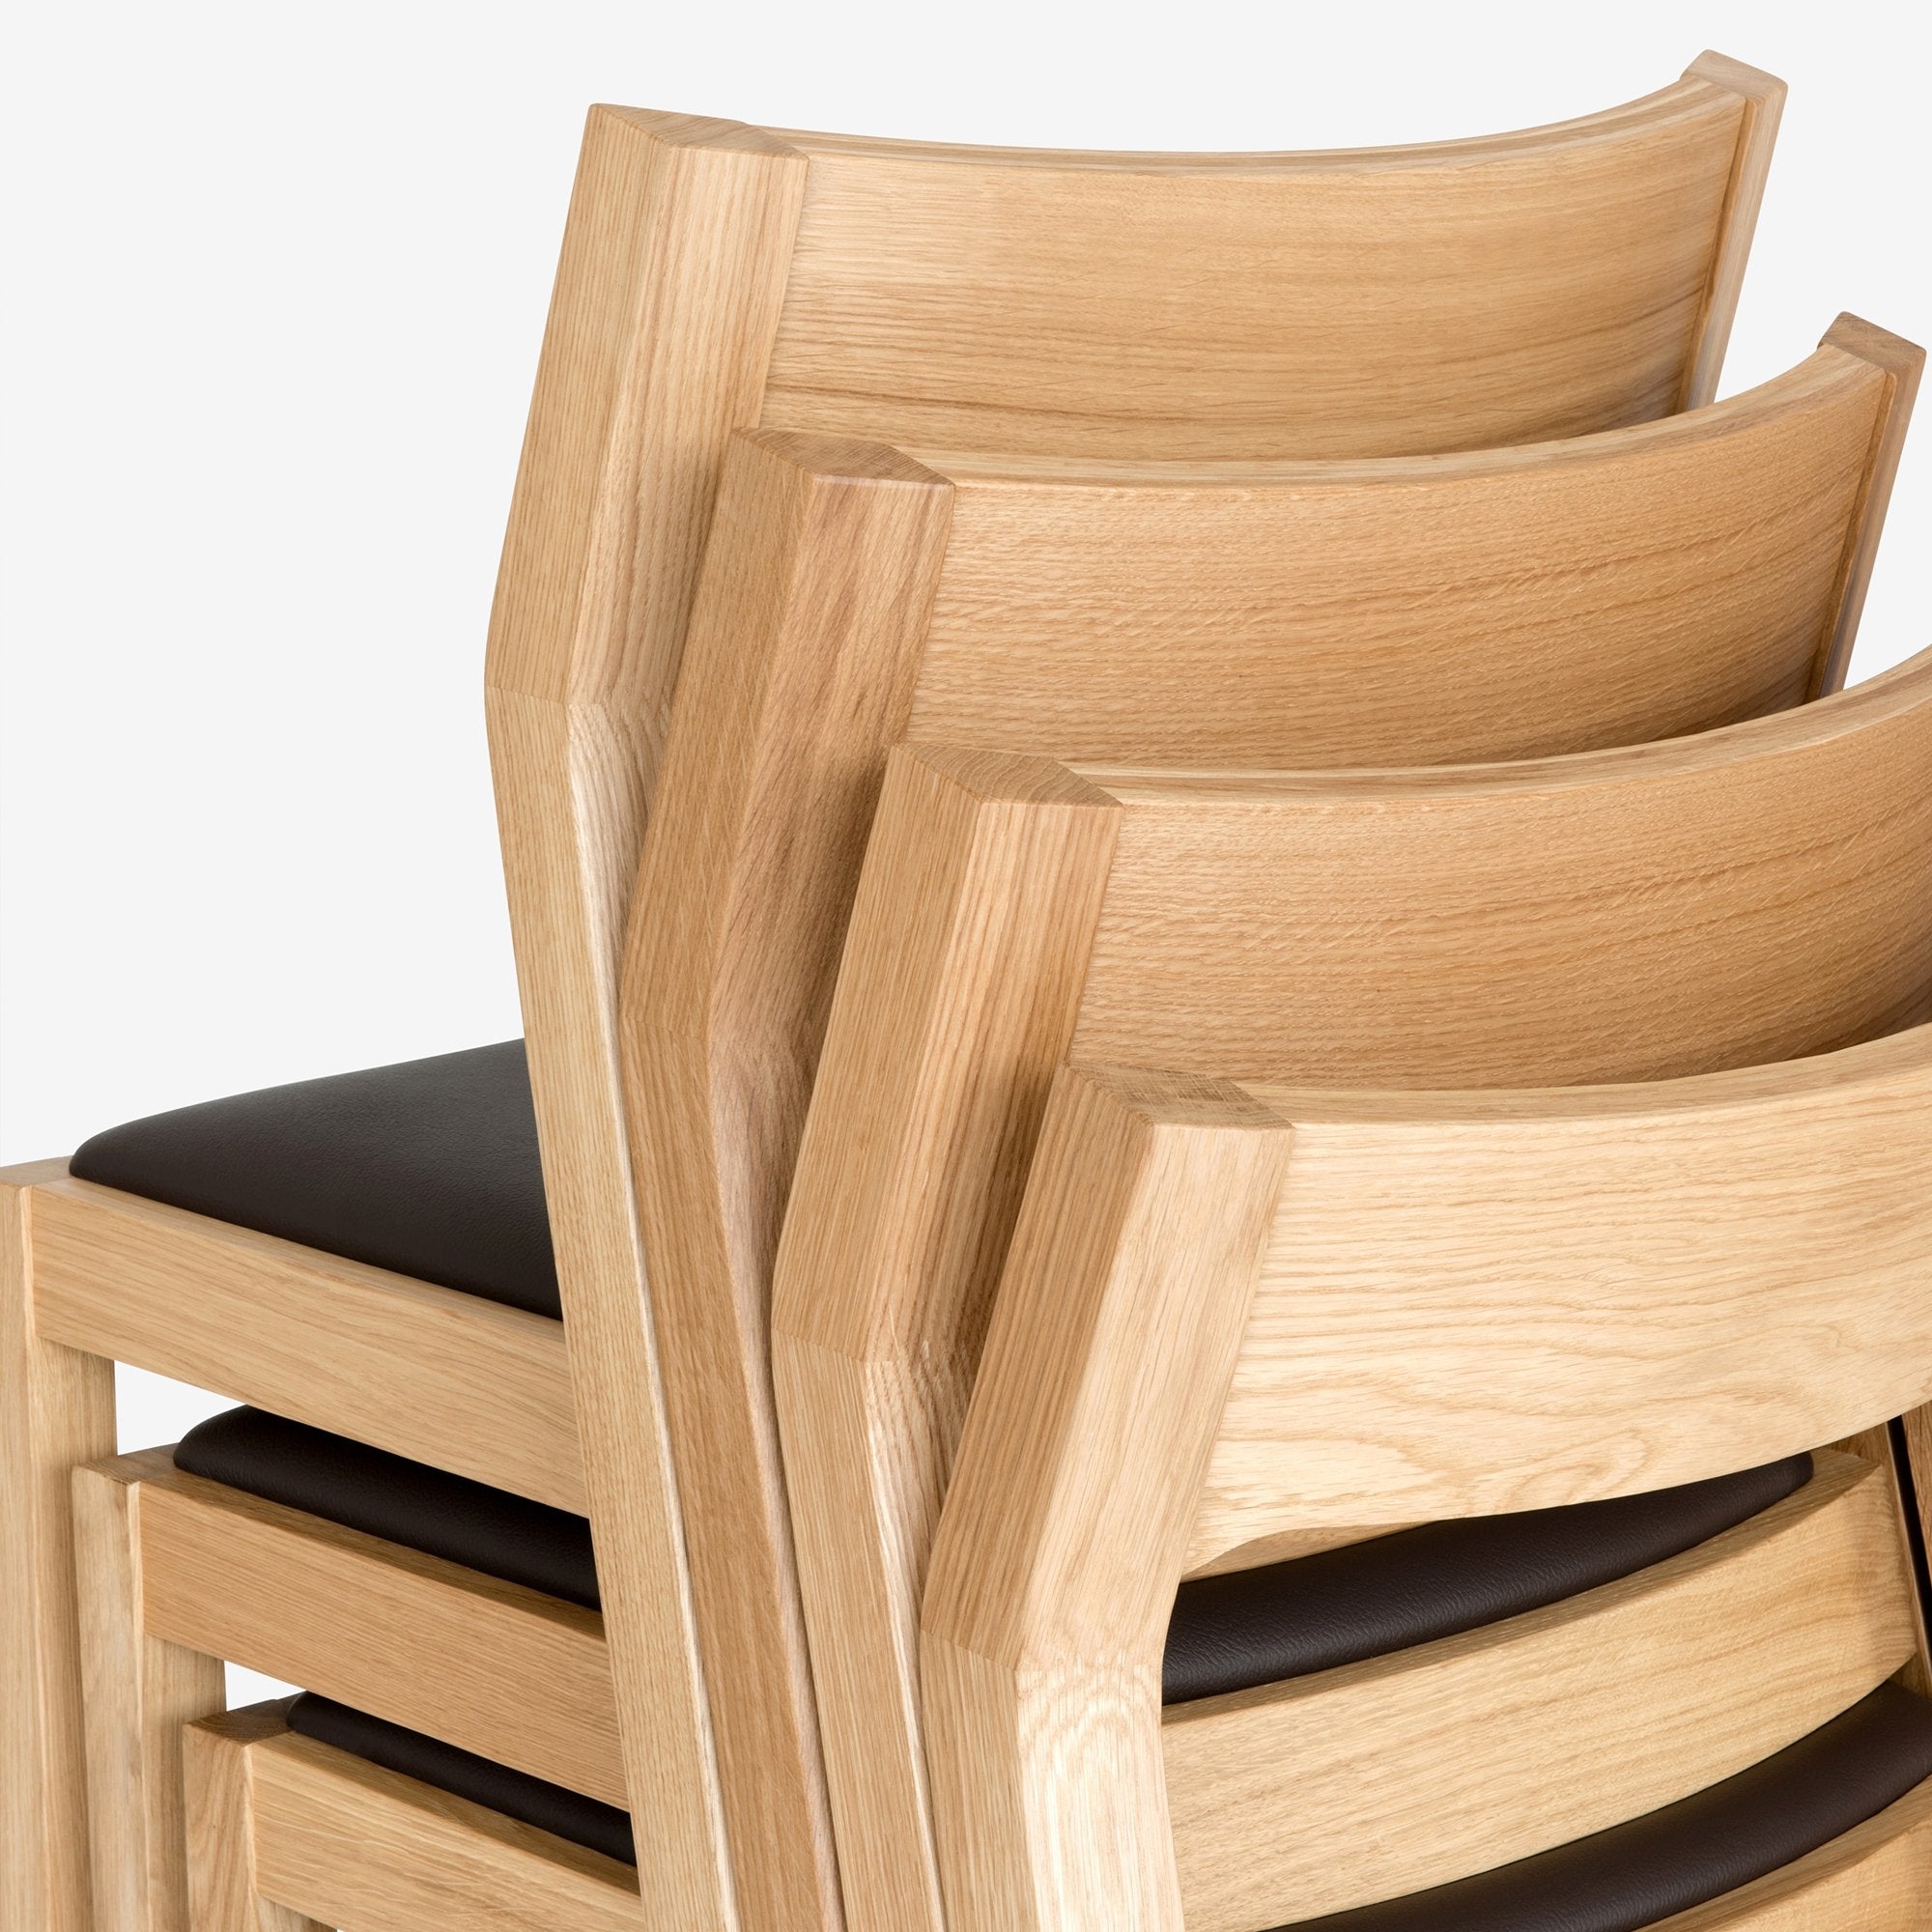 Profile Chair - THAT COOL LIVING